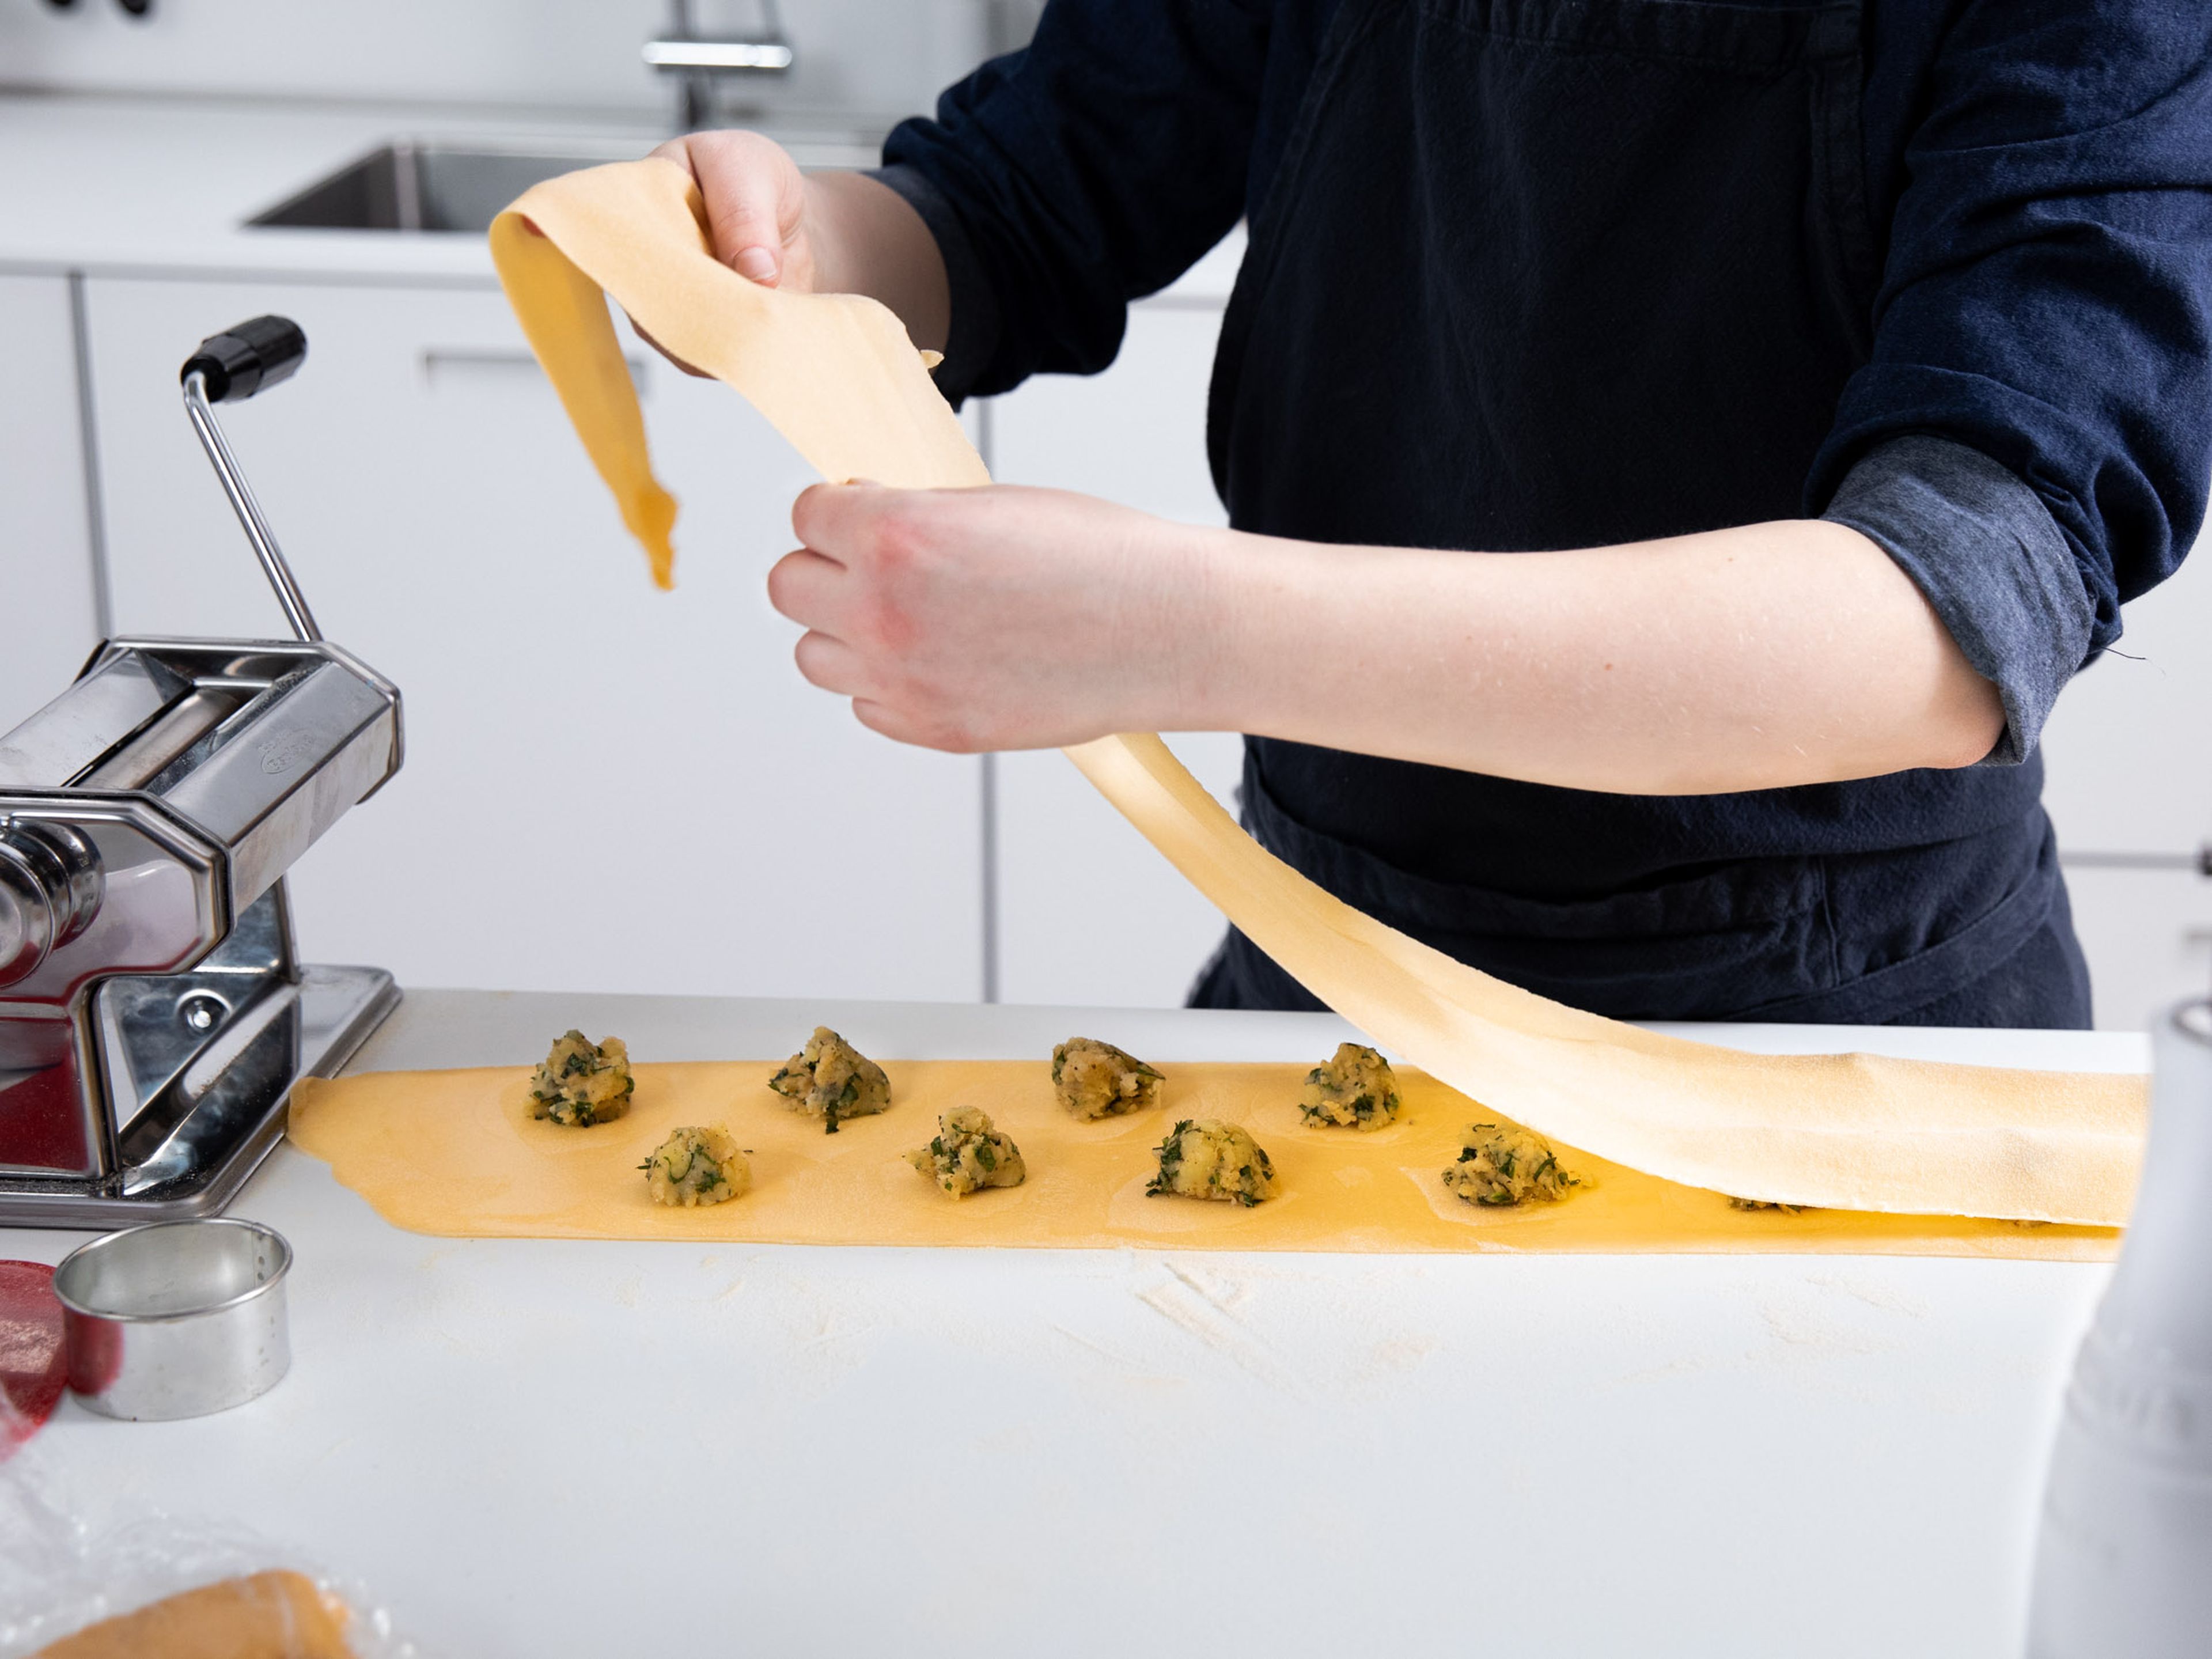 Quarter pasta dough and use a pasta machine to roll out the dough. Stamp out discs of dough for the ravioli with a round cookie cutter. Add a spoonful of potato and mint filling to one disc and brush the dough with some water. Place a second disc of dough on top and press around the edges to seal. Repeat the process with remaining dough and filling.